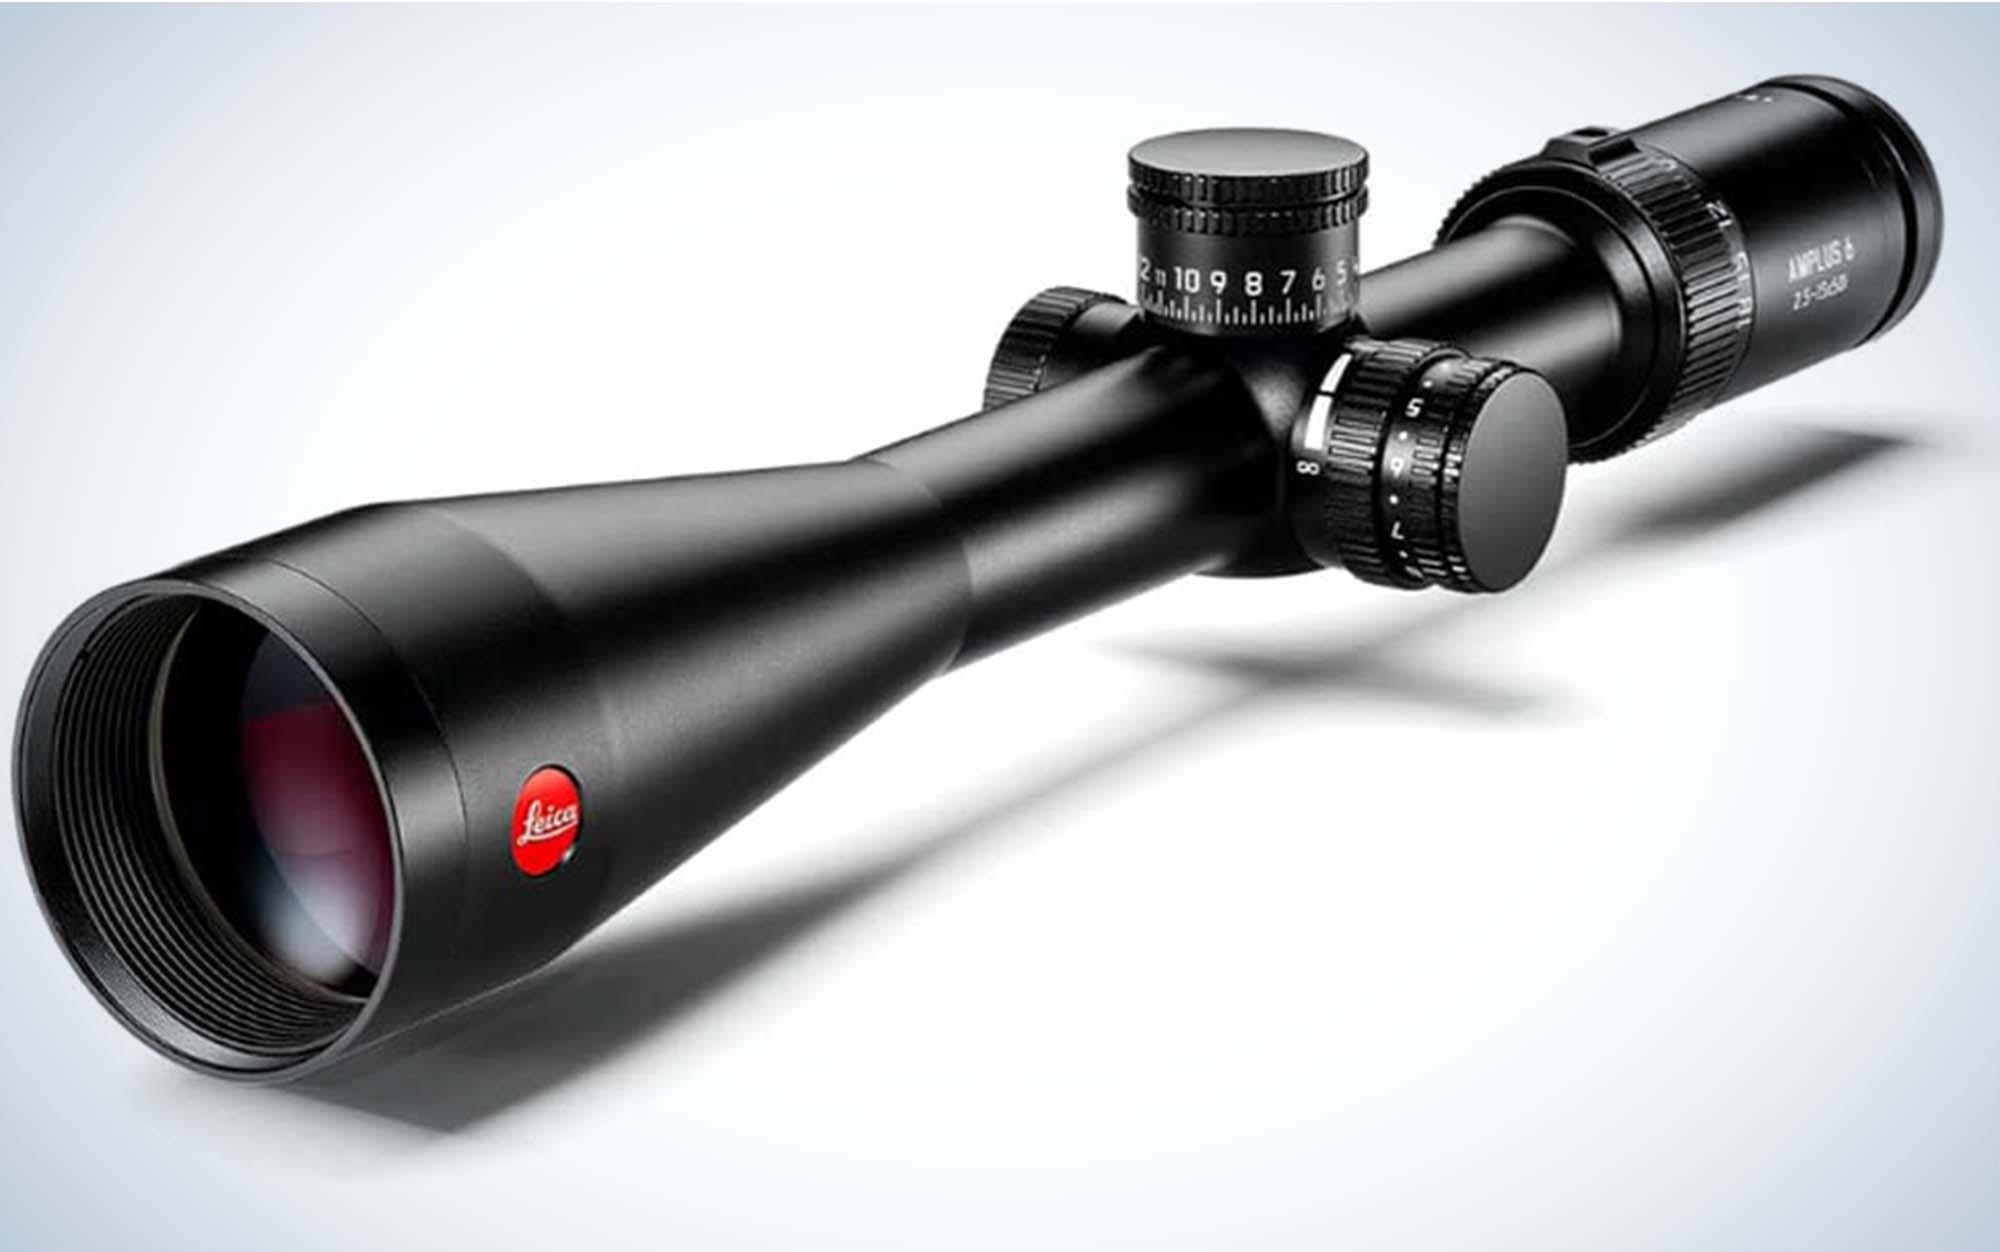 The Leica Amplus 6 3-18x44i is the best high-end rifle scope.